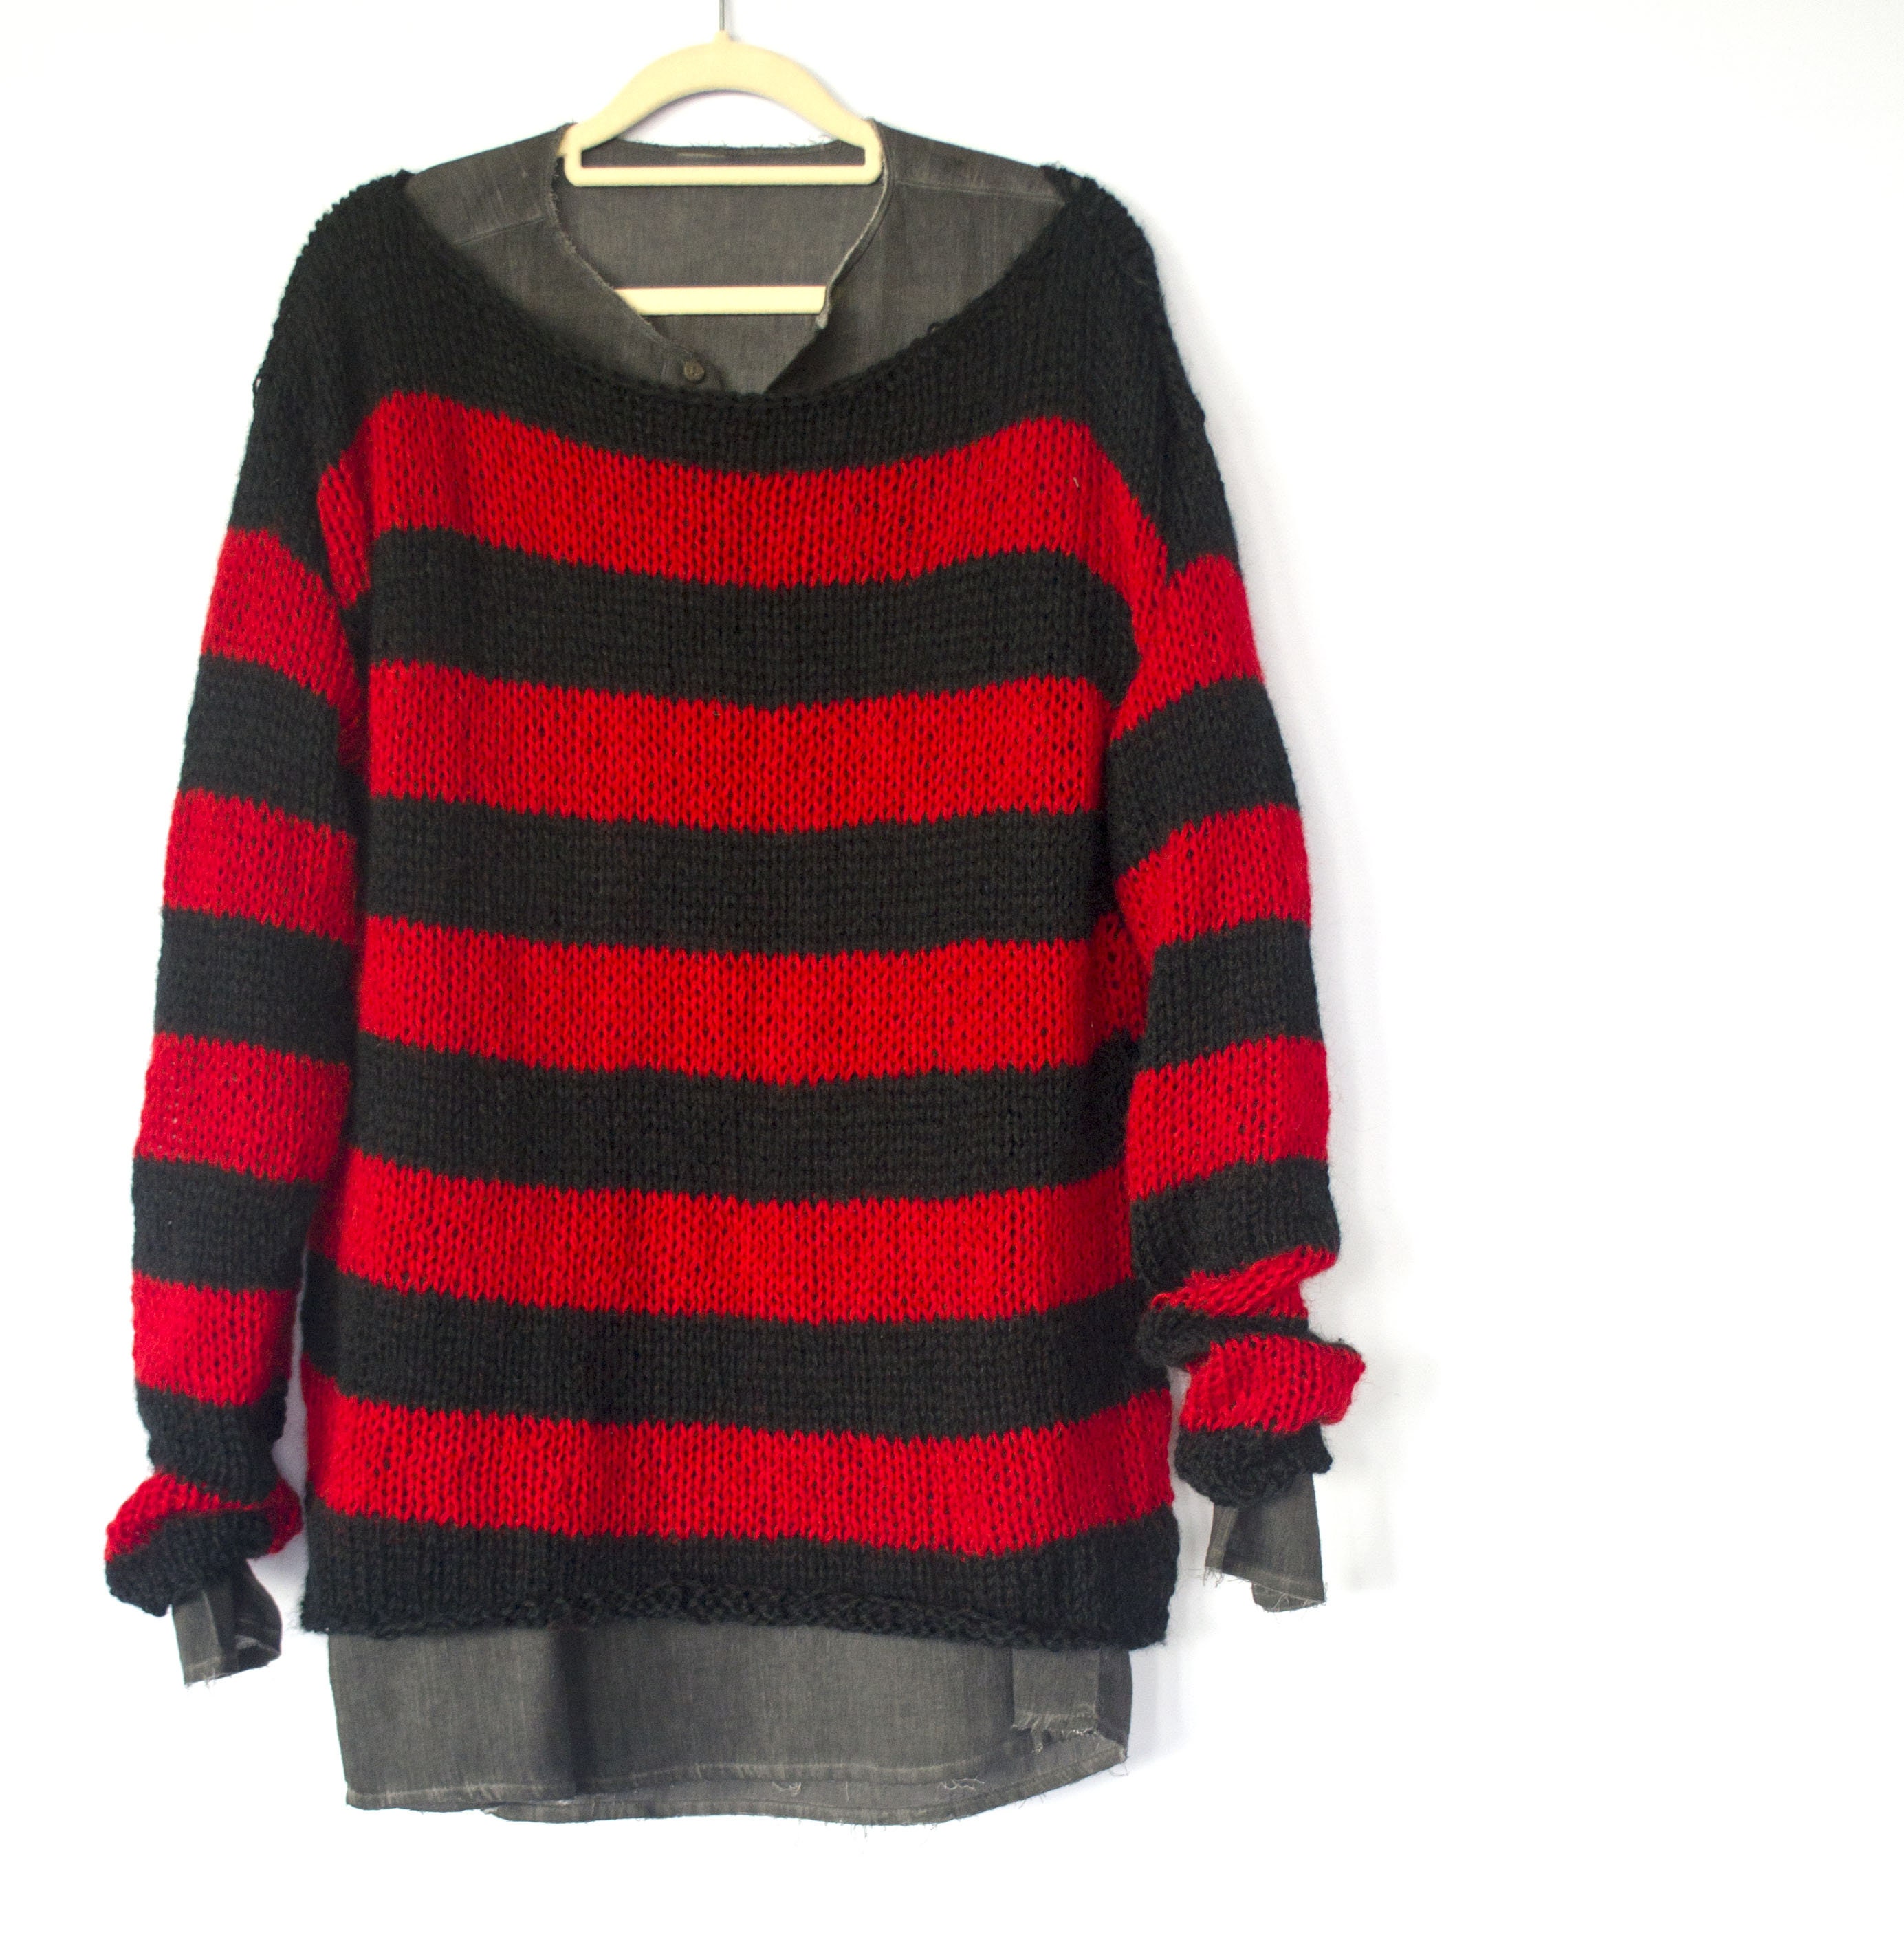 Mohair Sweater 80s Punk Style Nonbinary Red Black Striped | Etsy